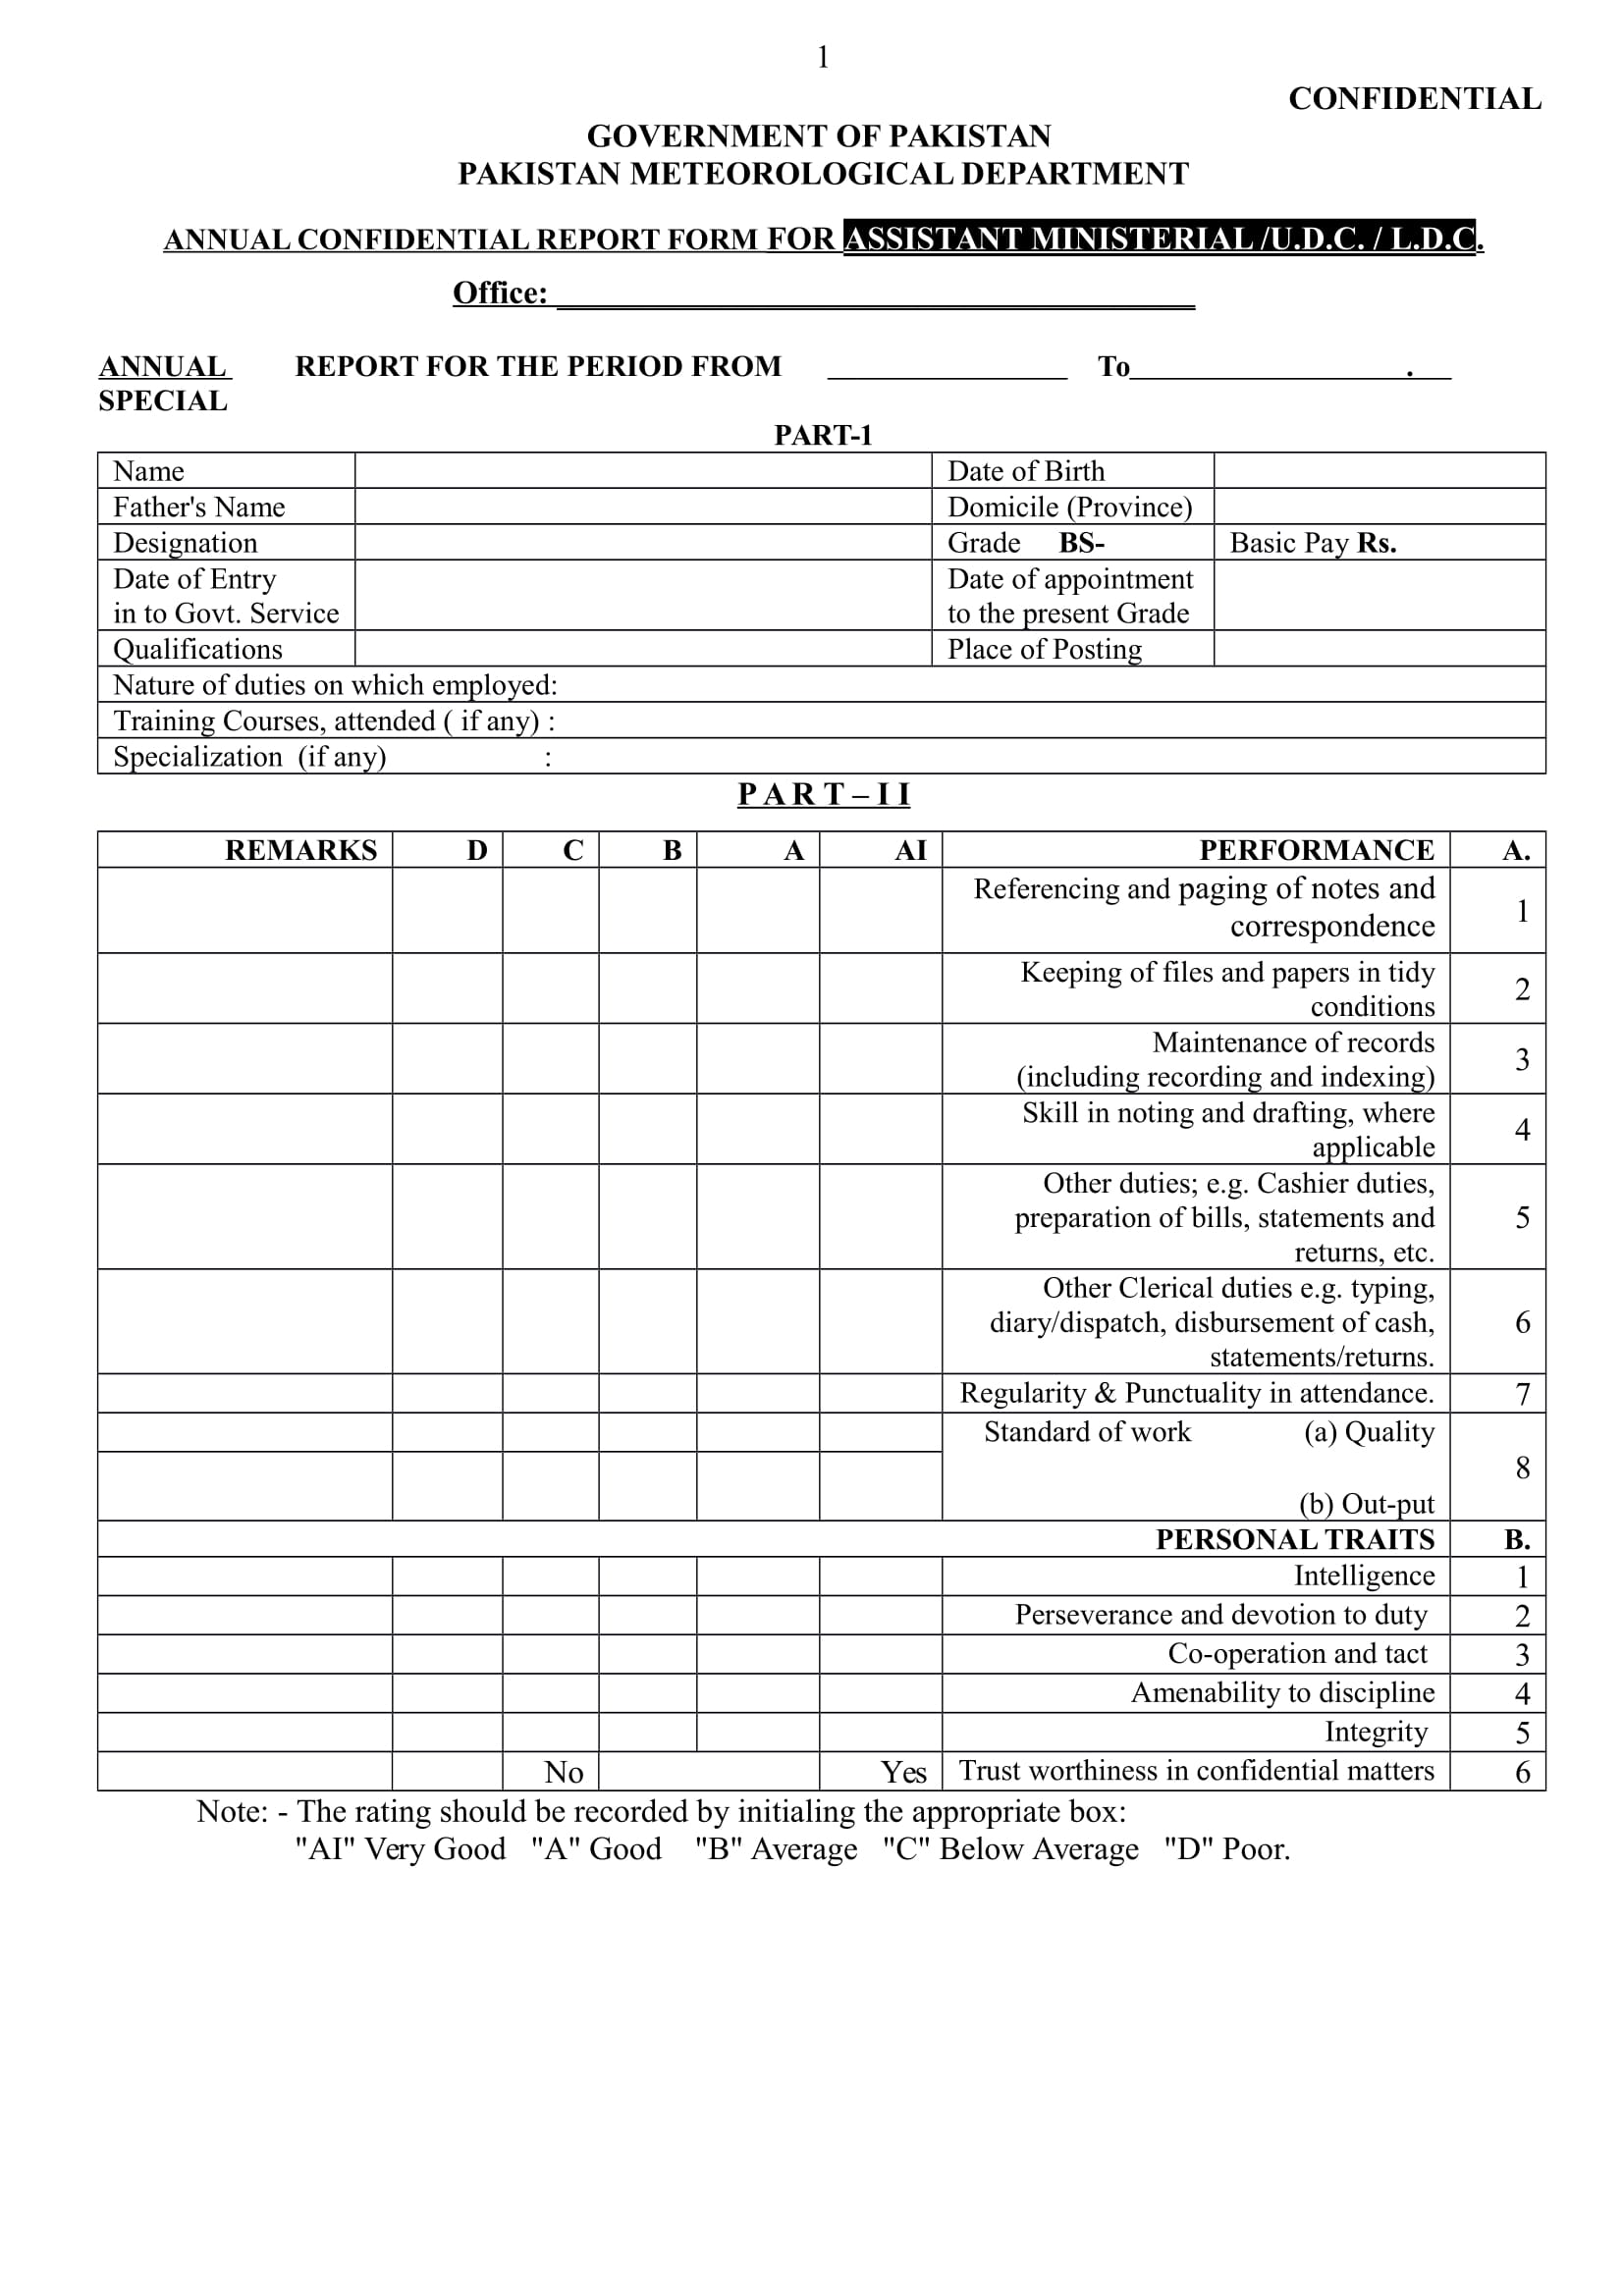 annual confdential report form for assistant 1